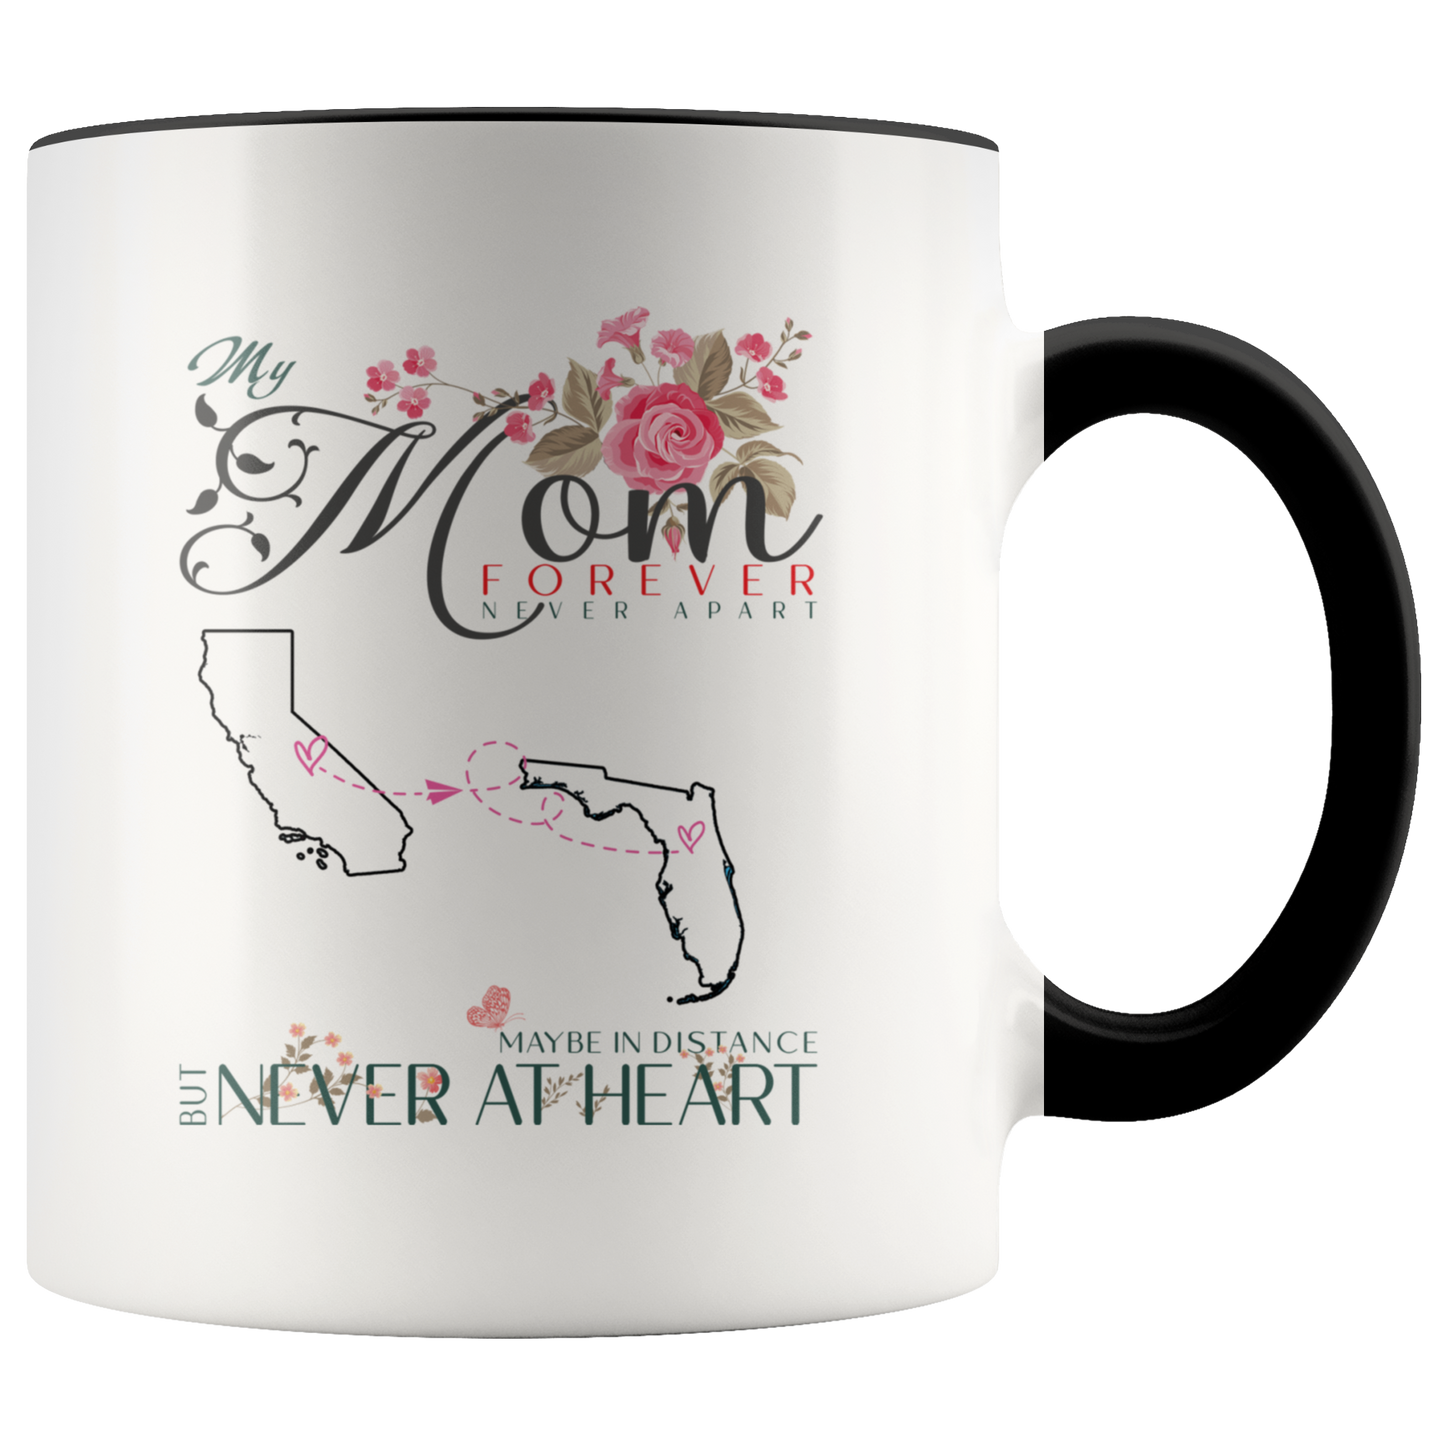 M-20321571-sp-27271 - [ California | Florida ] (CC_Accent_Mug_) Personalized Mothers Day Coffee Mug - My Mom Forever Never A